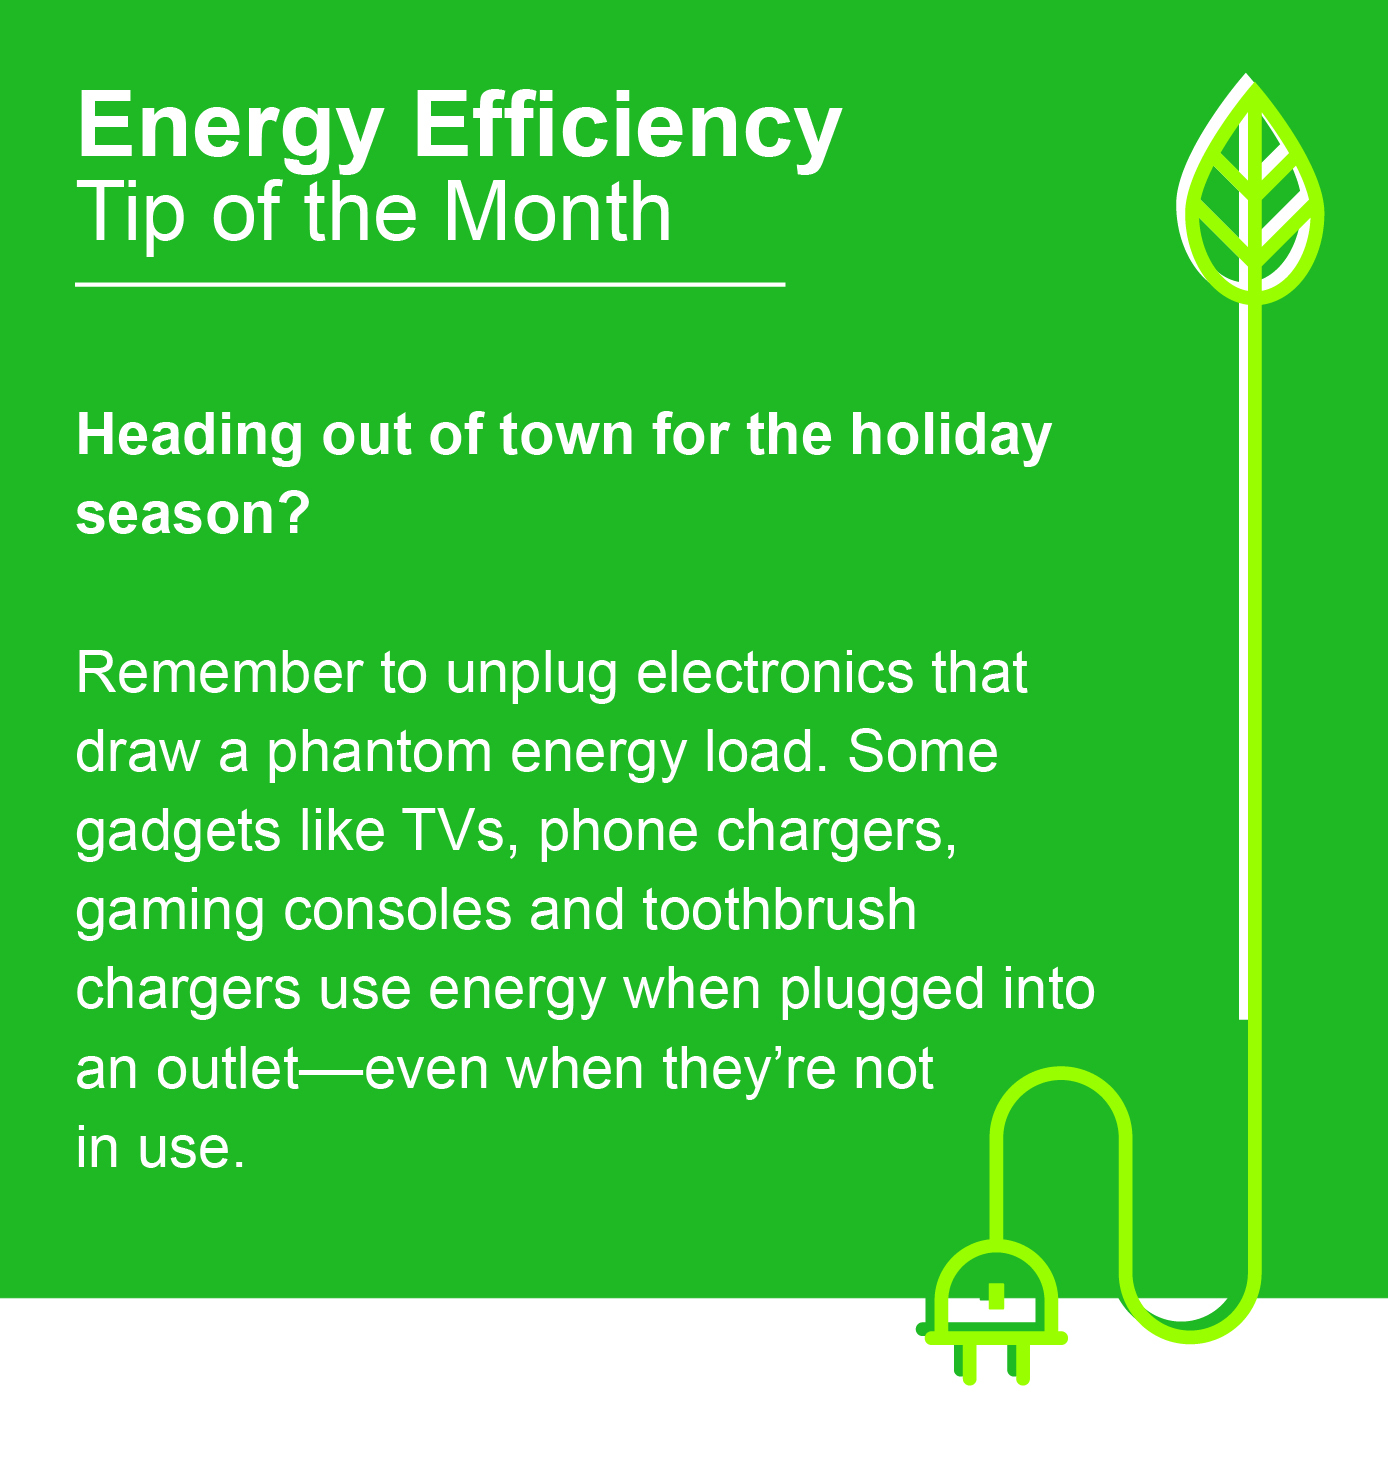 Energy Efficiency Tip of the Month: Heading out of town for the holiday season? Remember to unplug electronics that draw a phantom energy load. Some gadgets like TVs, phone chargers, gaming consoles and toothbrush chargers use energy when plugged into an outlet - even when they're not in use.